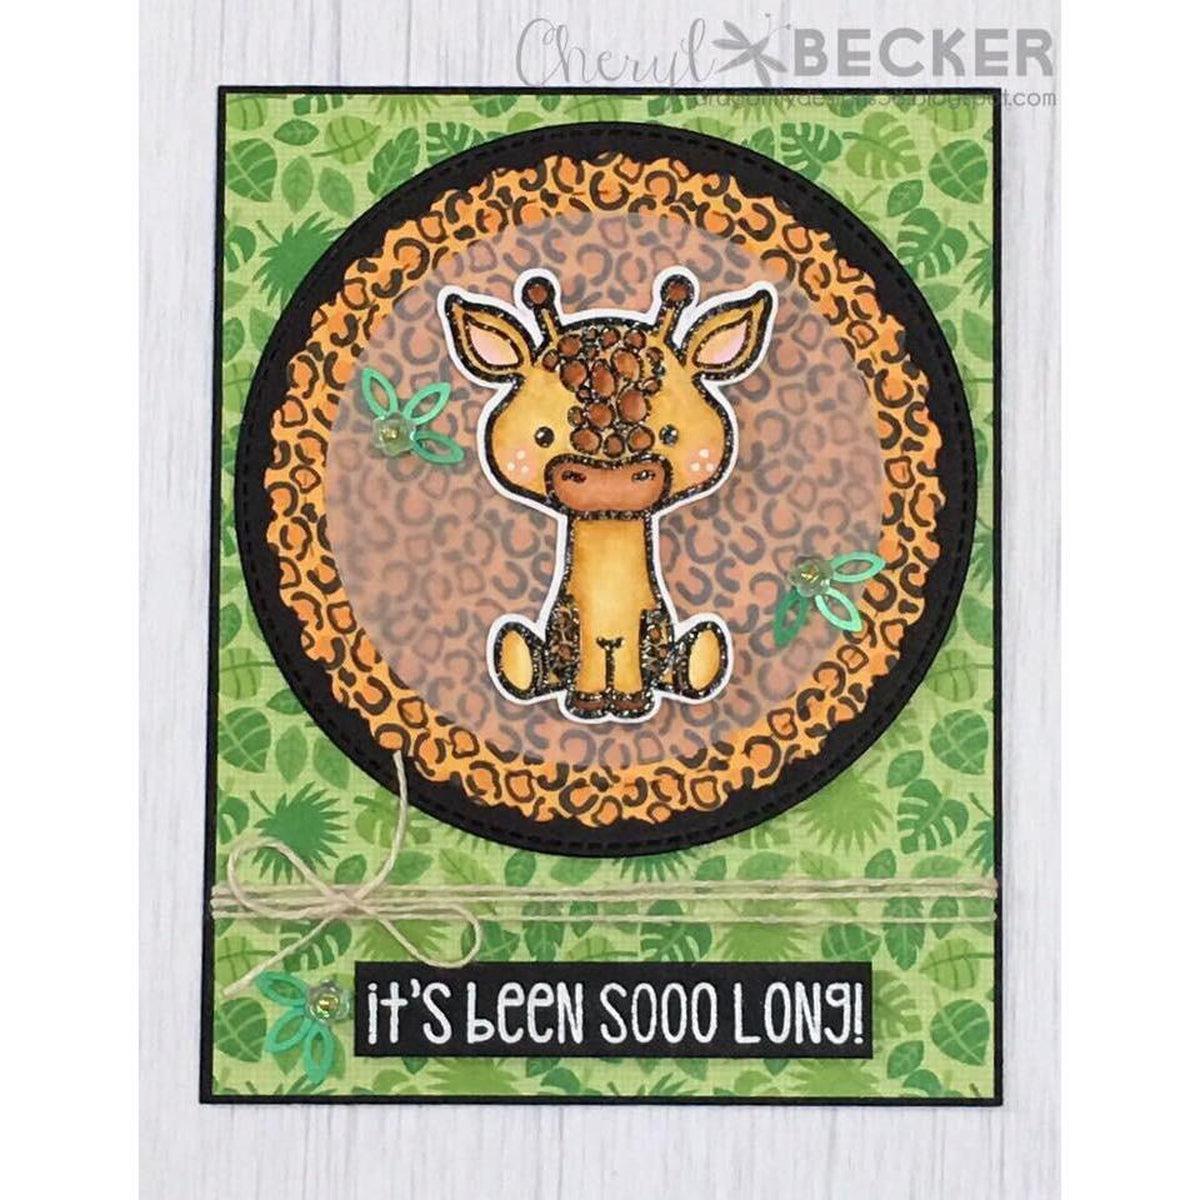 Lola the Giraffe 3x4 Clear Stamps by Kat Scrappiness - Kat Scrappiness